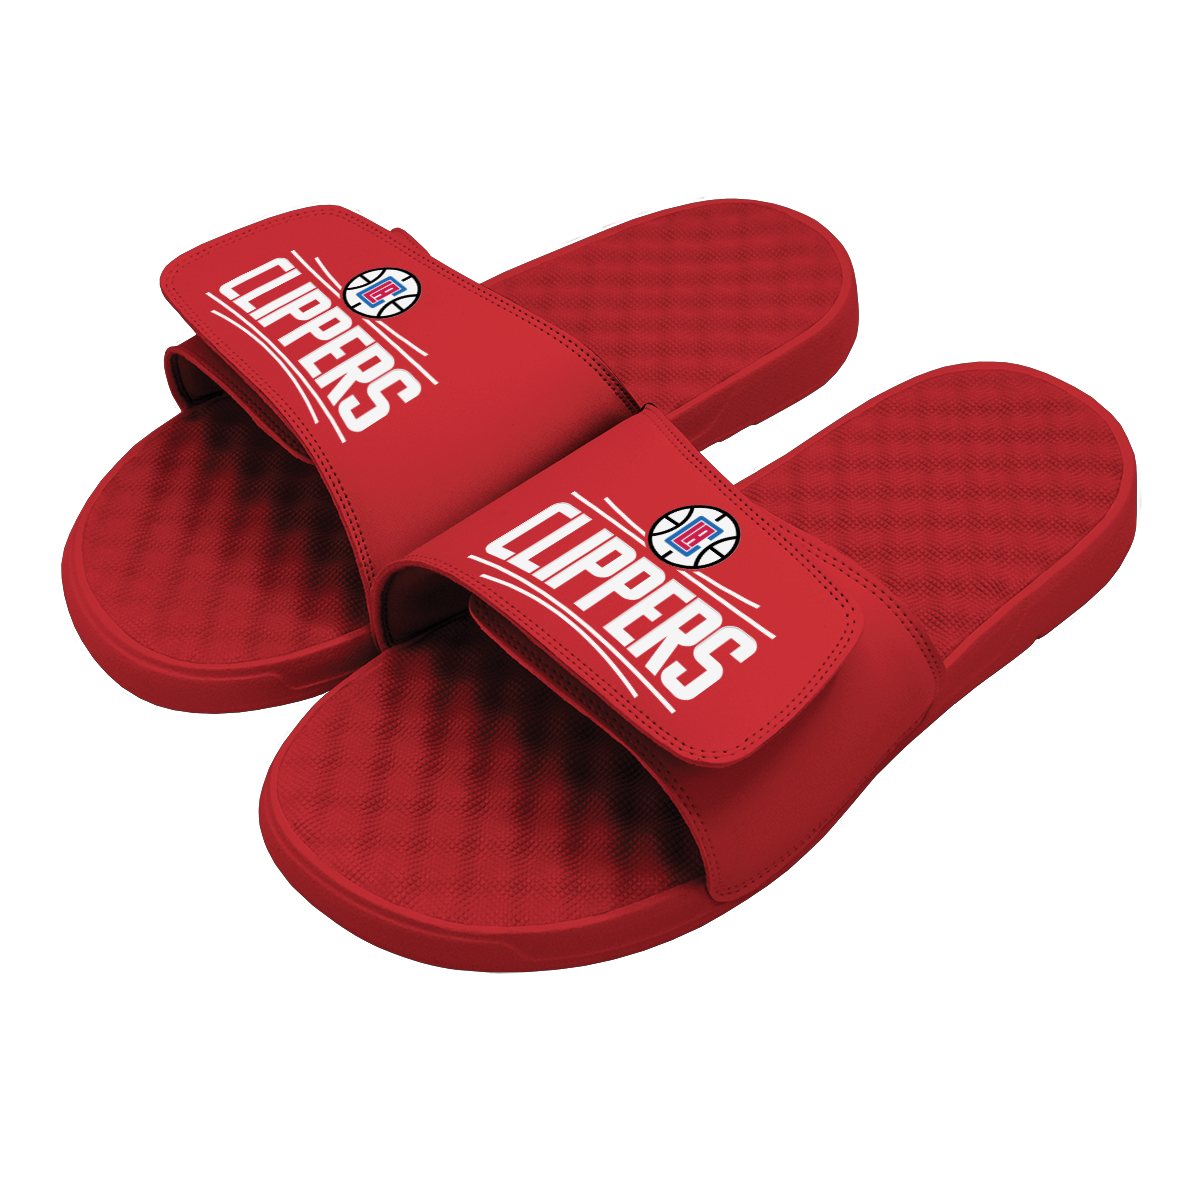 Los Angeles Clippers Global Slides